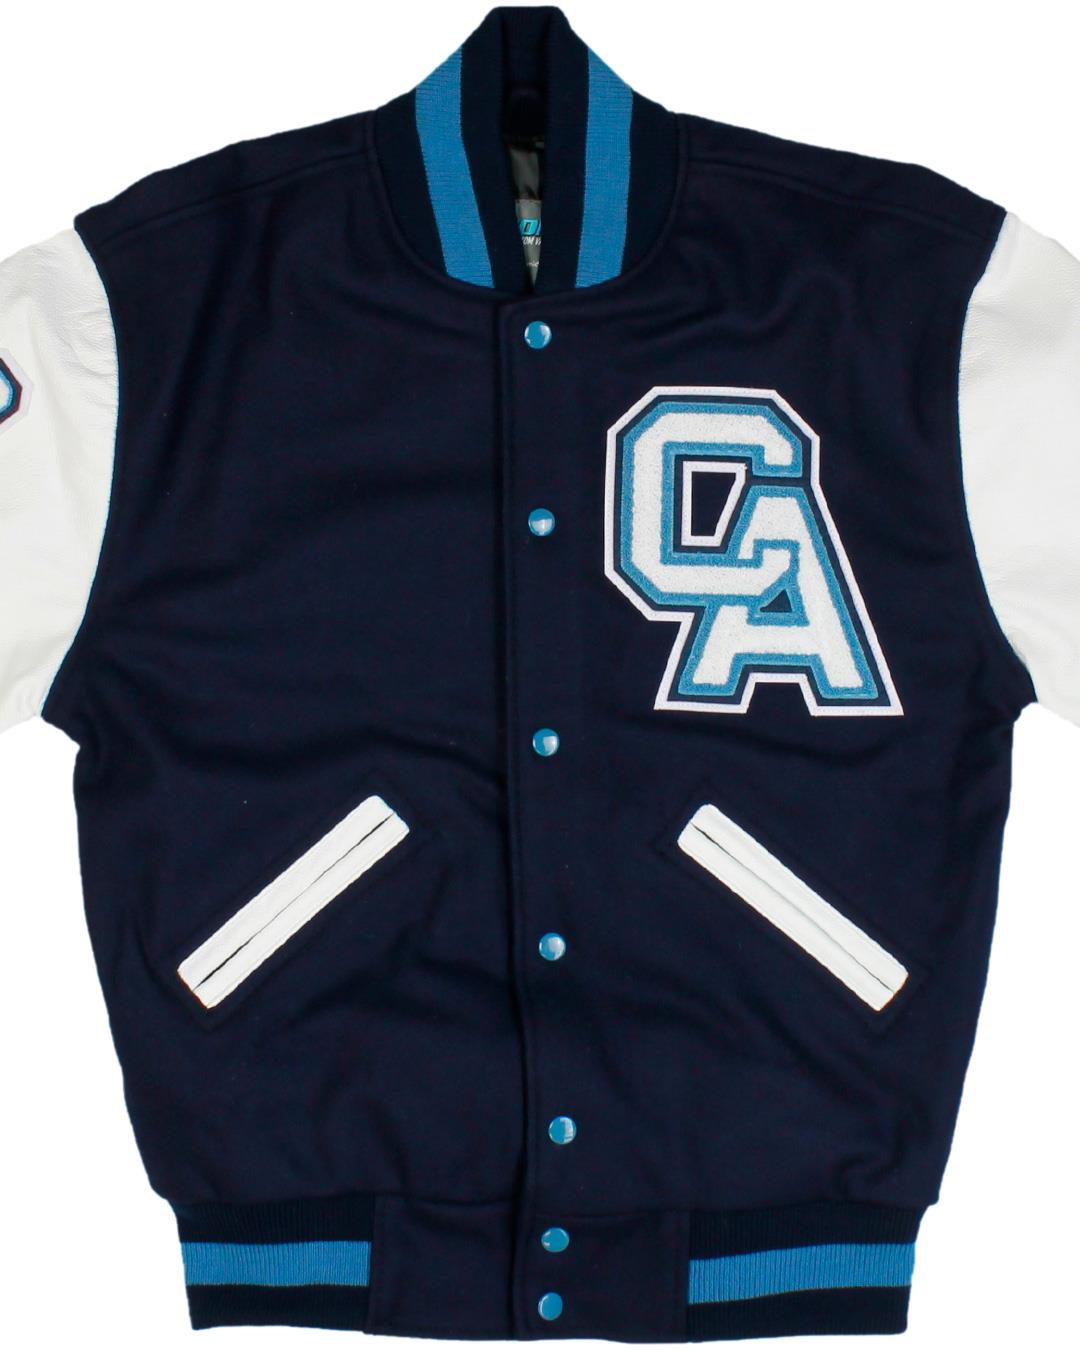 Coral Academy of Science Lettermen Jacket, Reno, NV - Front